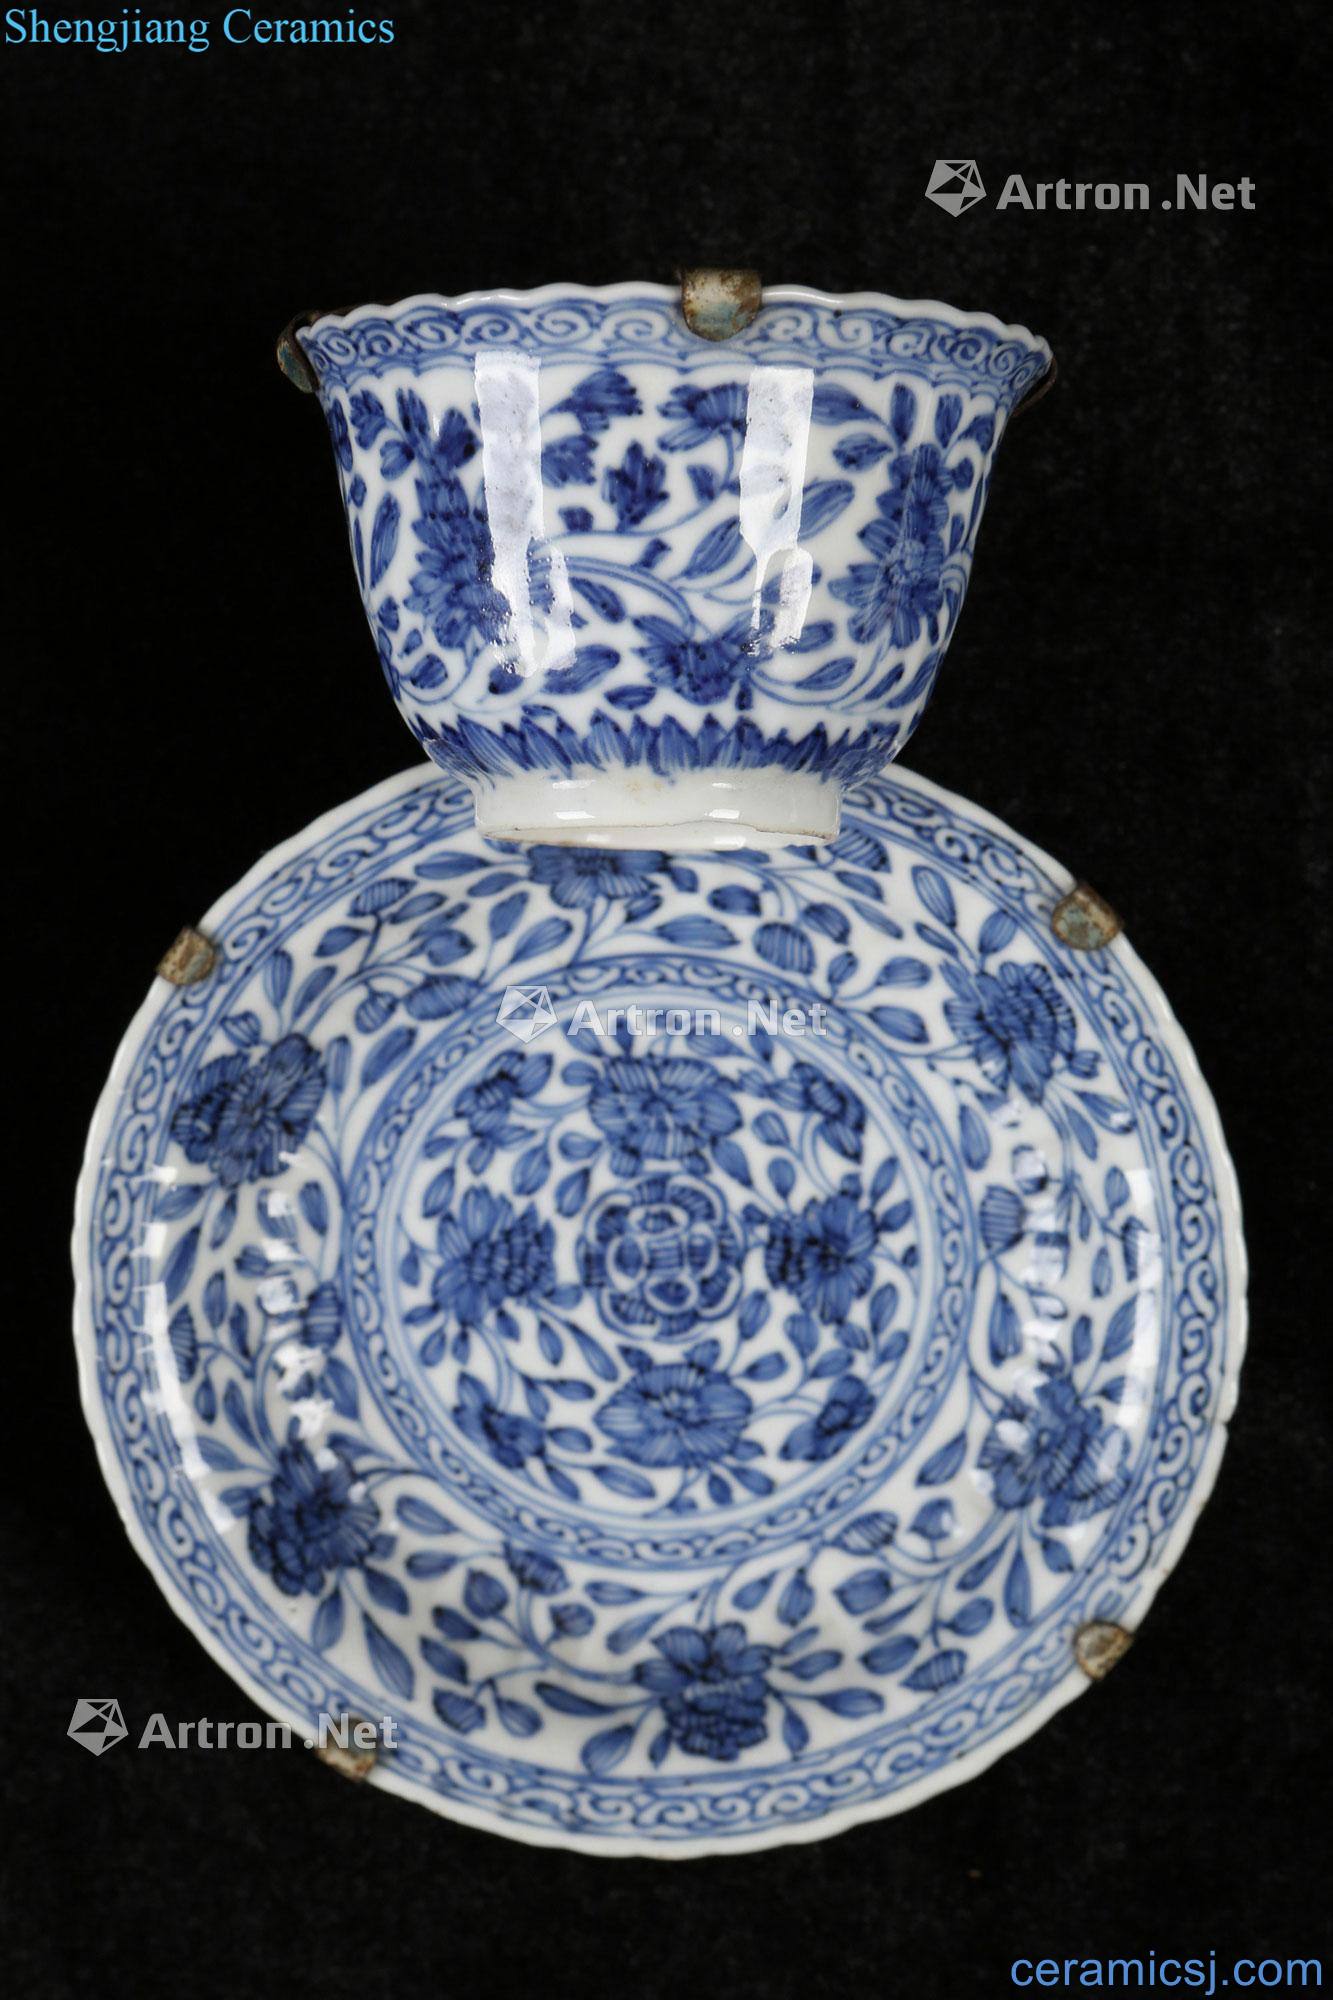 In the 18th century Blue and white tea cups